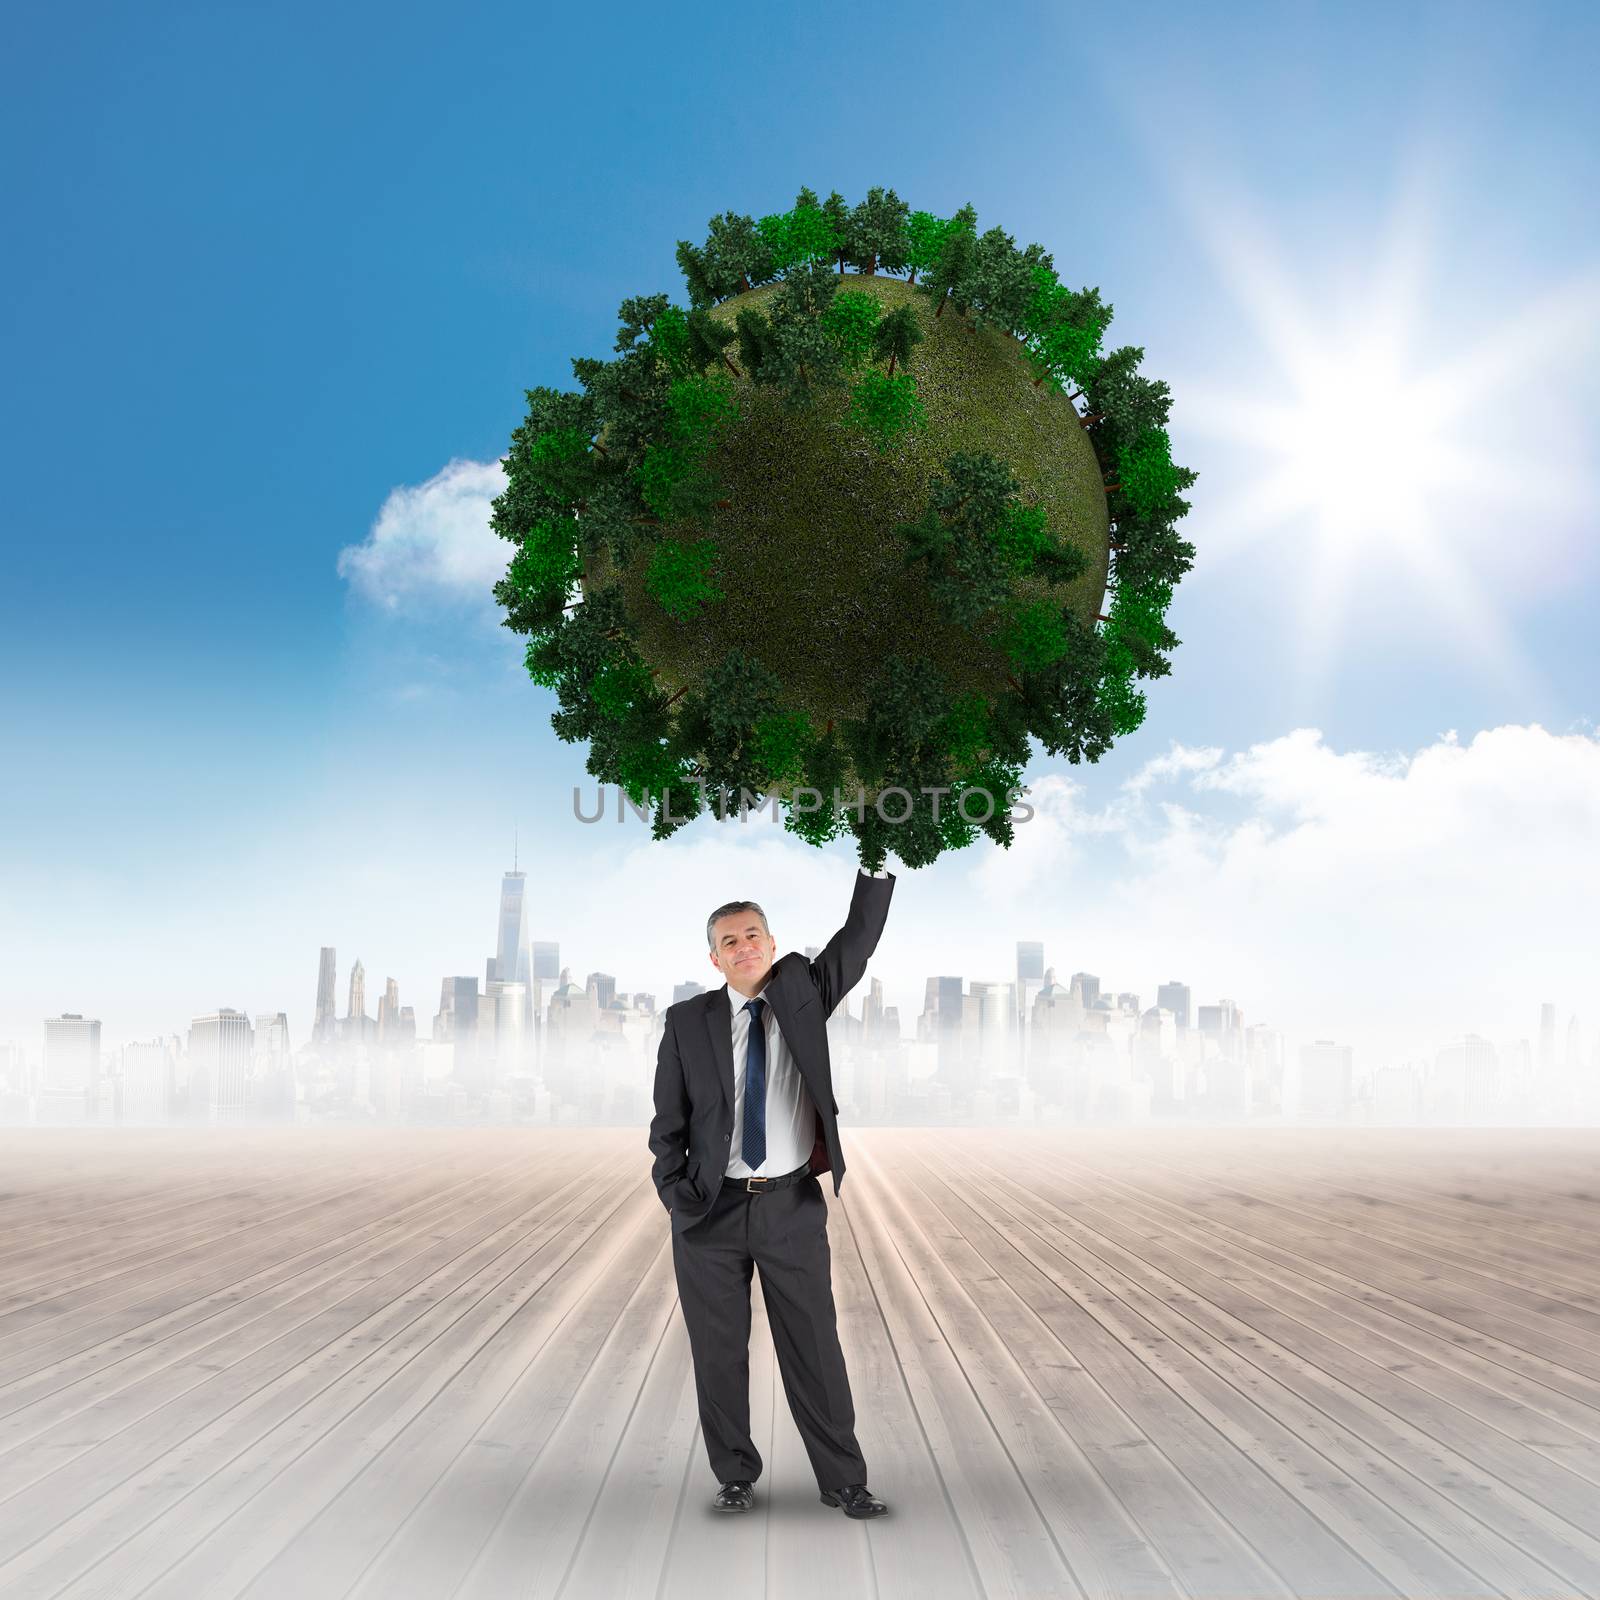 Composite image of businessman holding green sphere against cityscape on the horizon